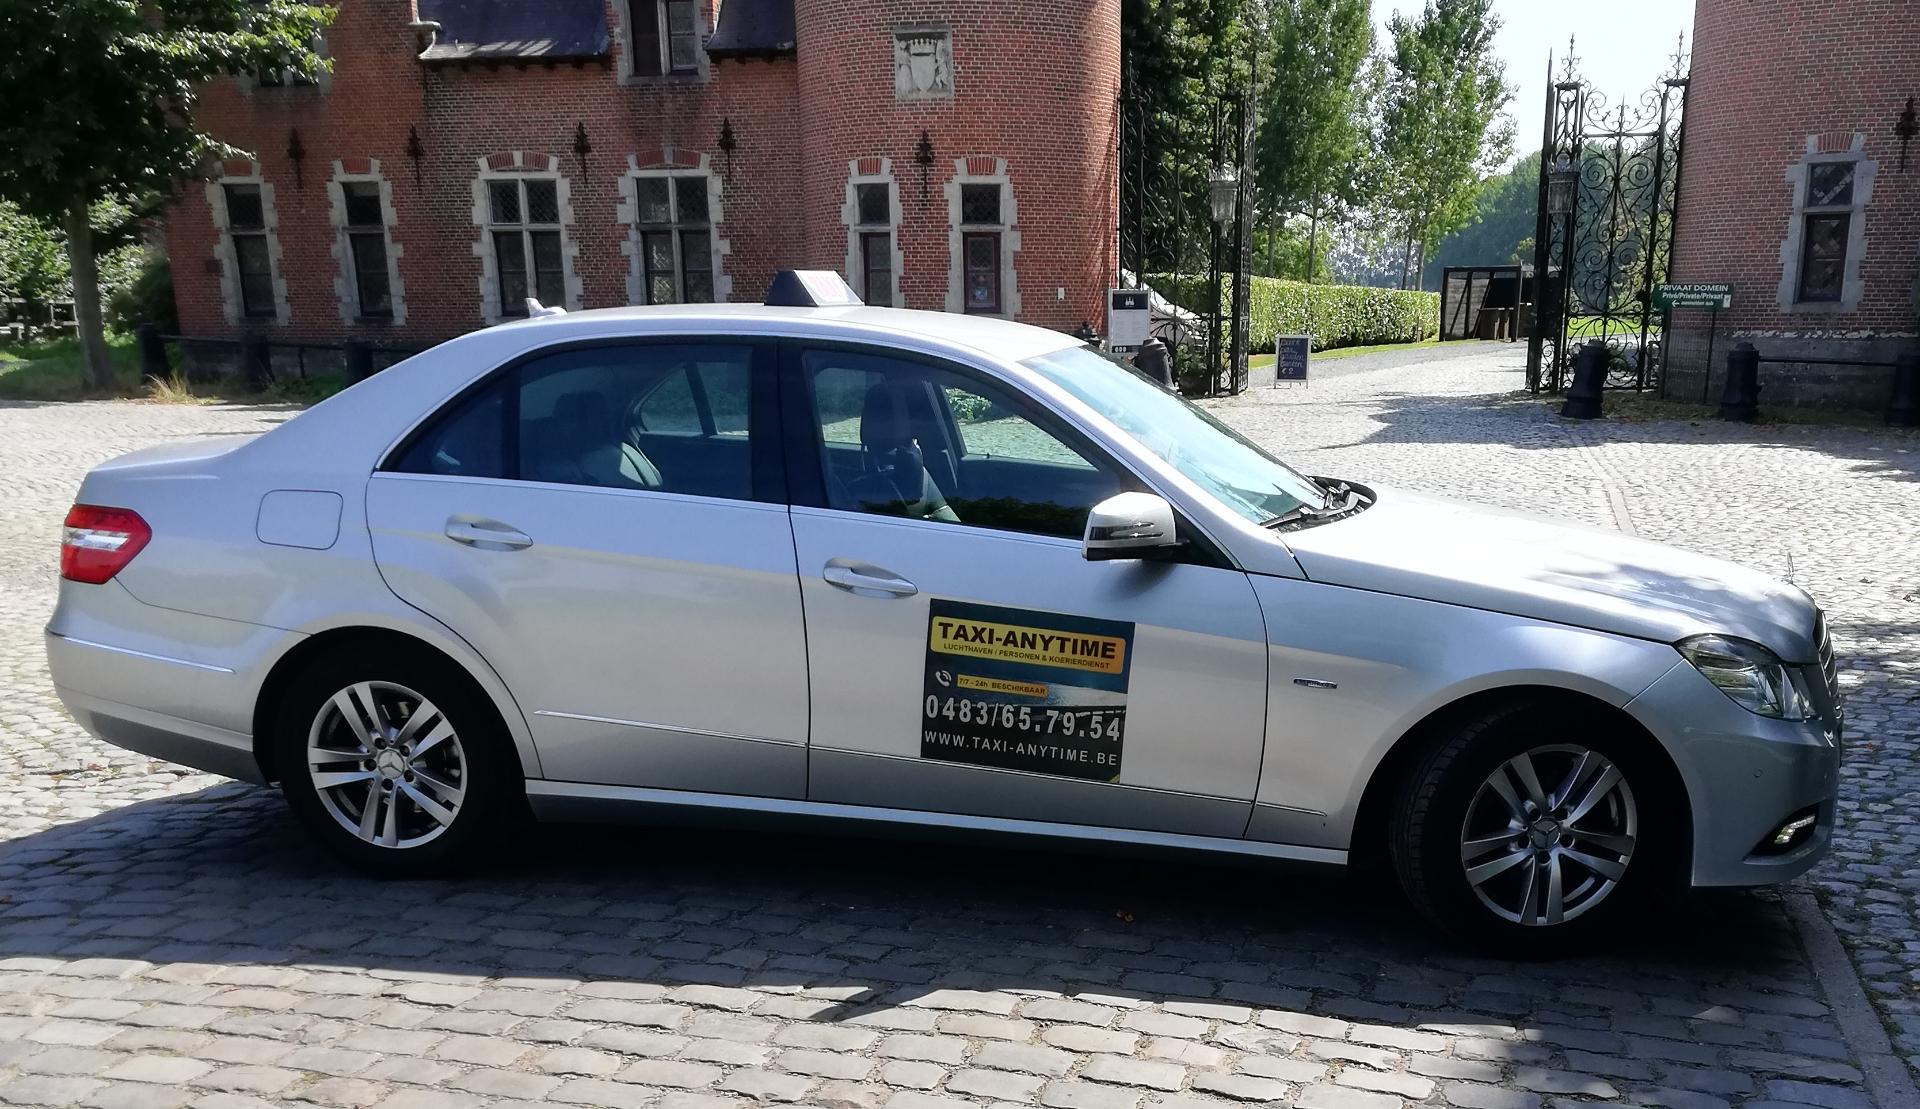 luxe-autoverhuurders Sint-Stevens-Woluwe Taxi-Anytime